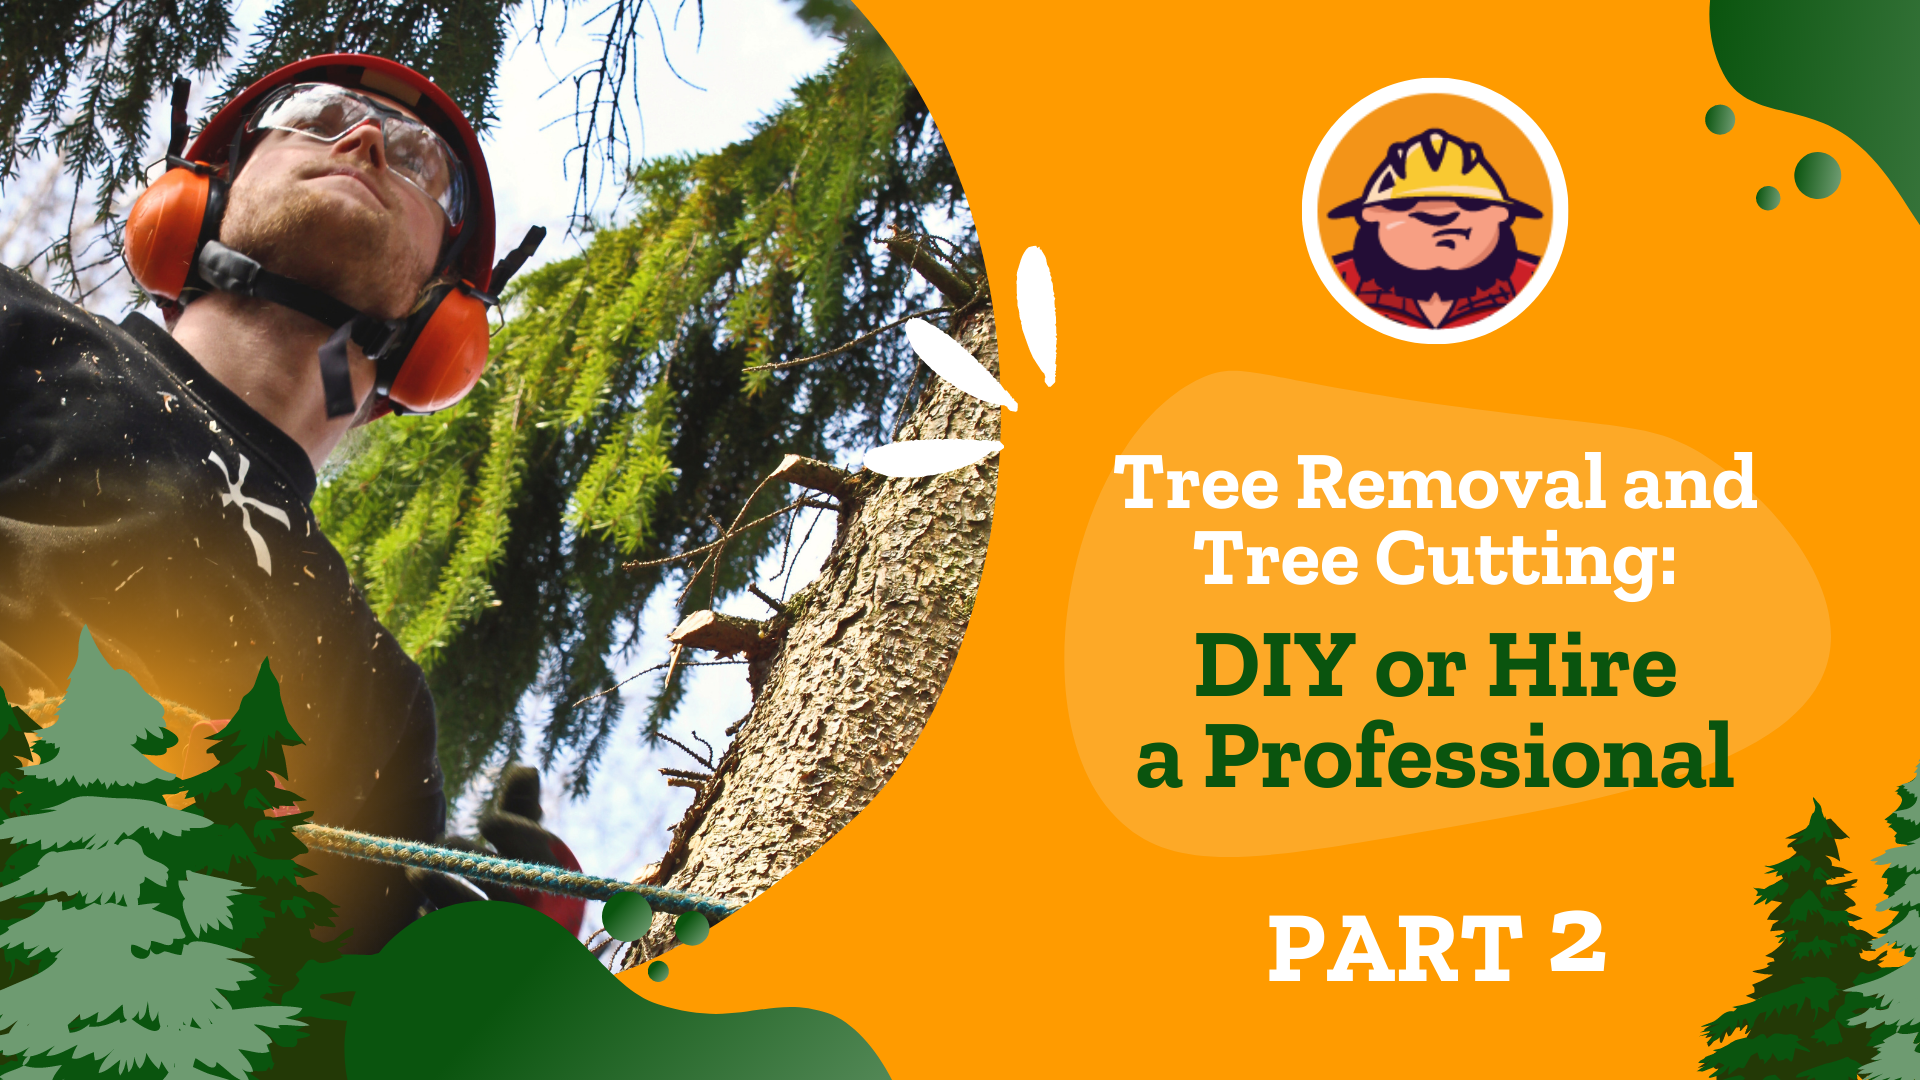 Part 2 - Tree Removal and Tree Cutting - DIY or Hire a Professional